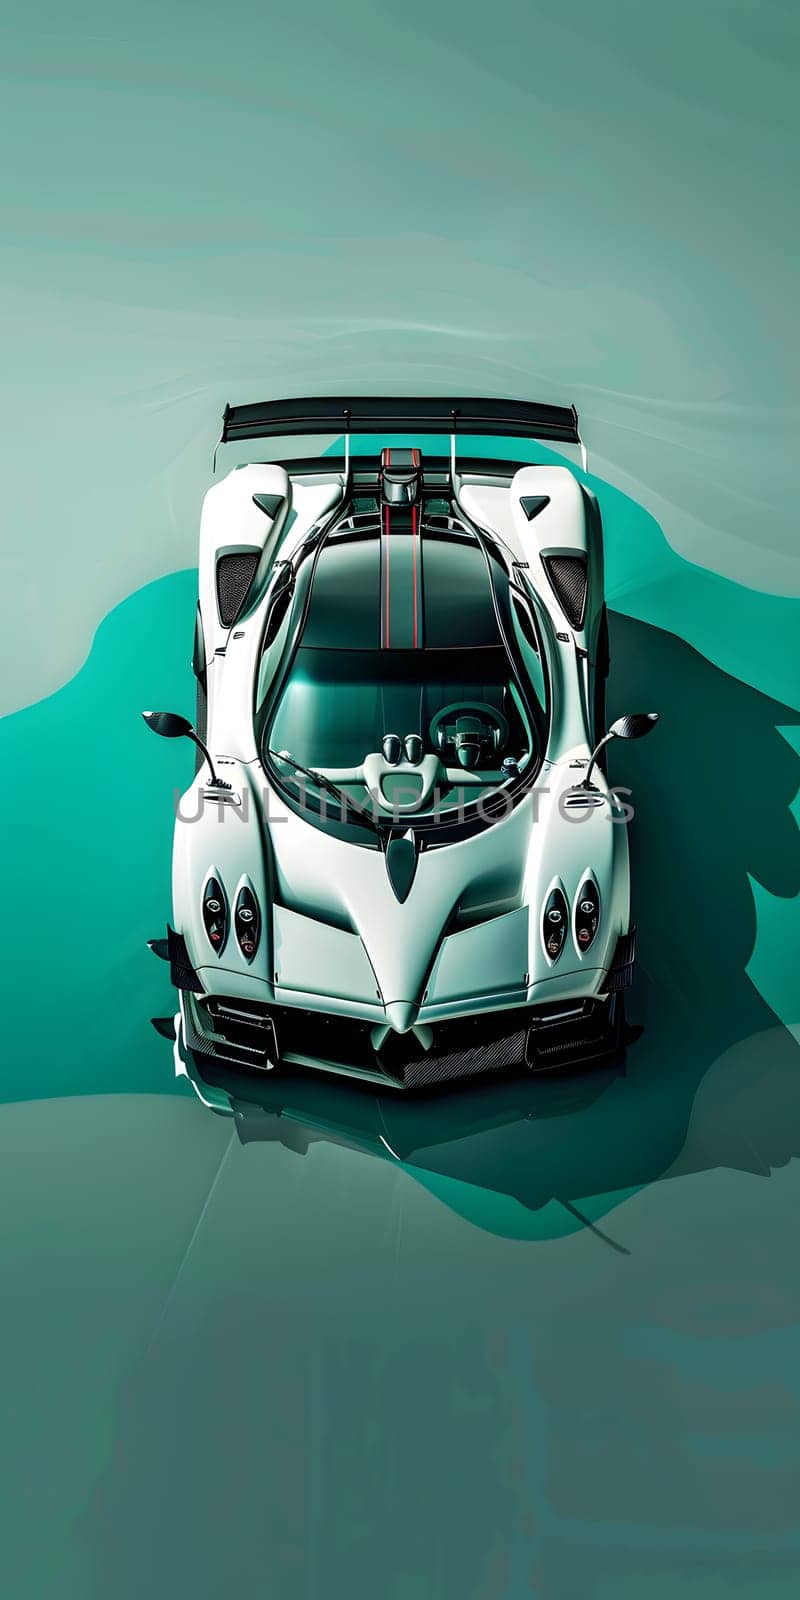 A white racing car is parked on a green surface with sleek automotive design by Nadtochiy